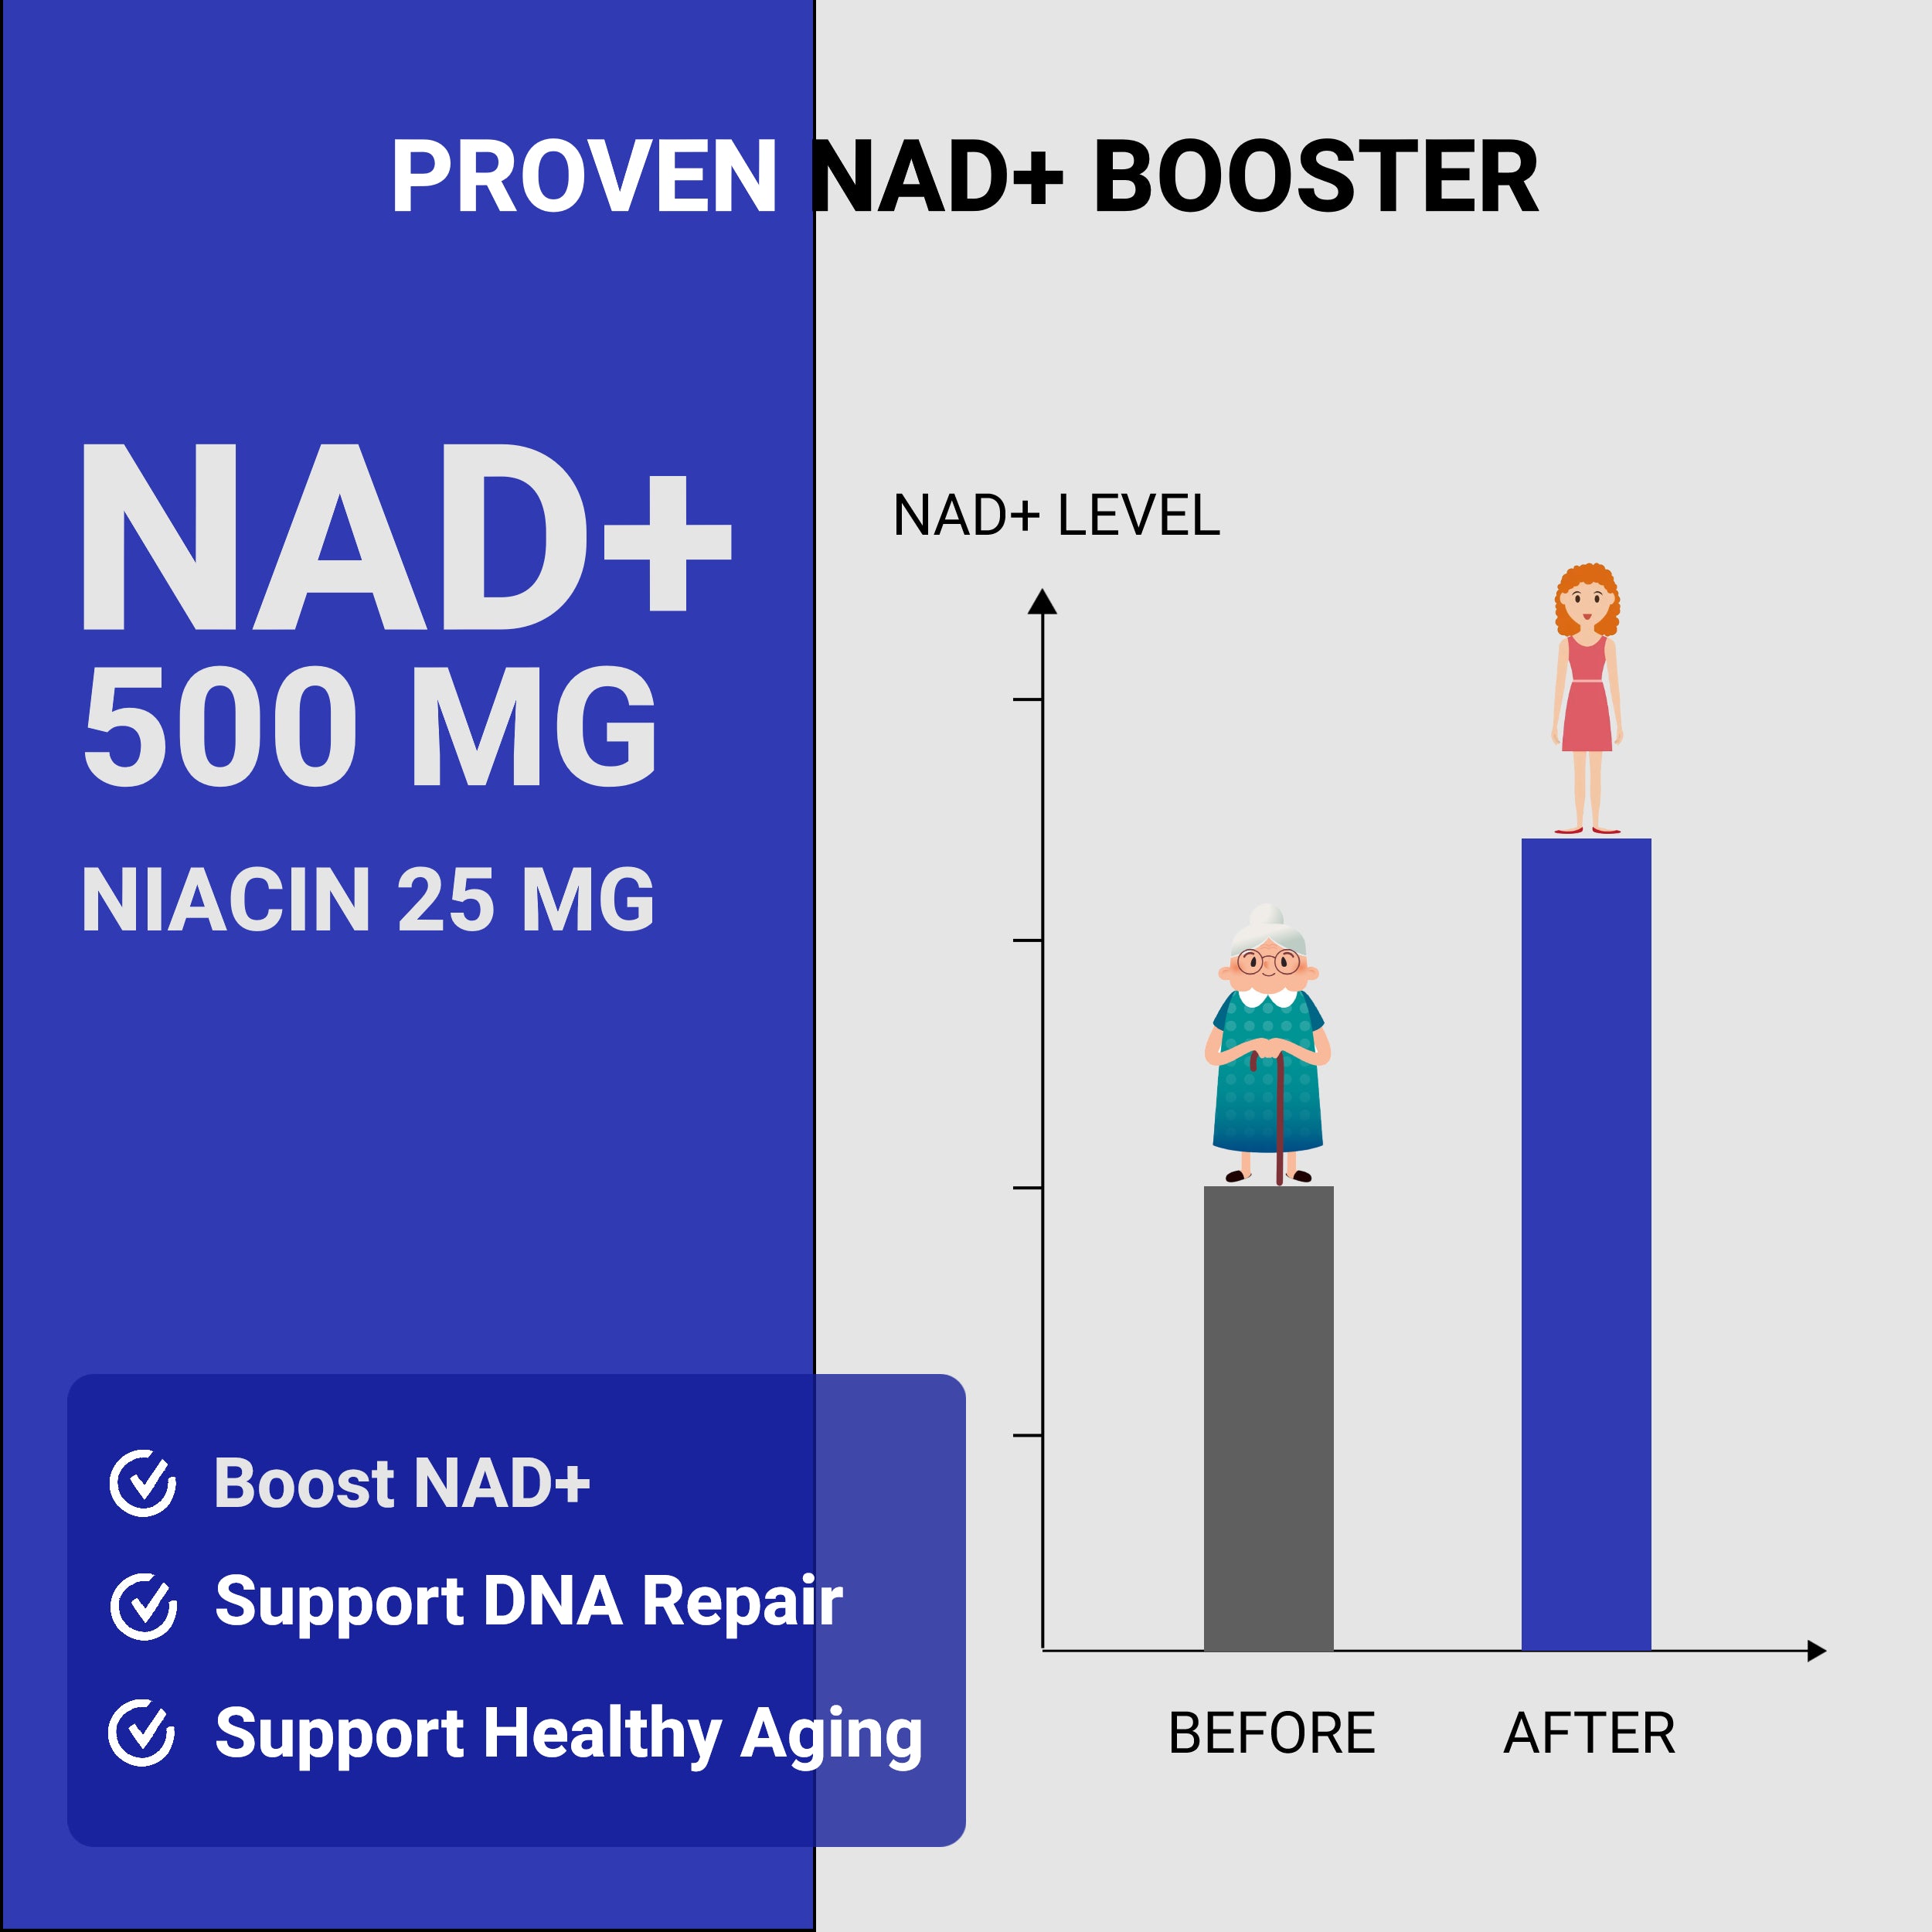 NAD+ Booster